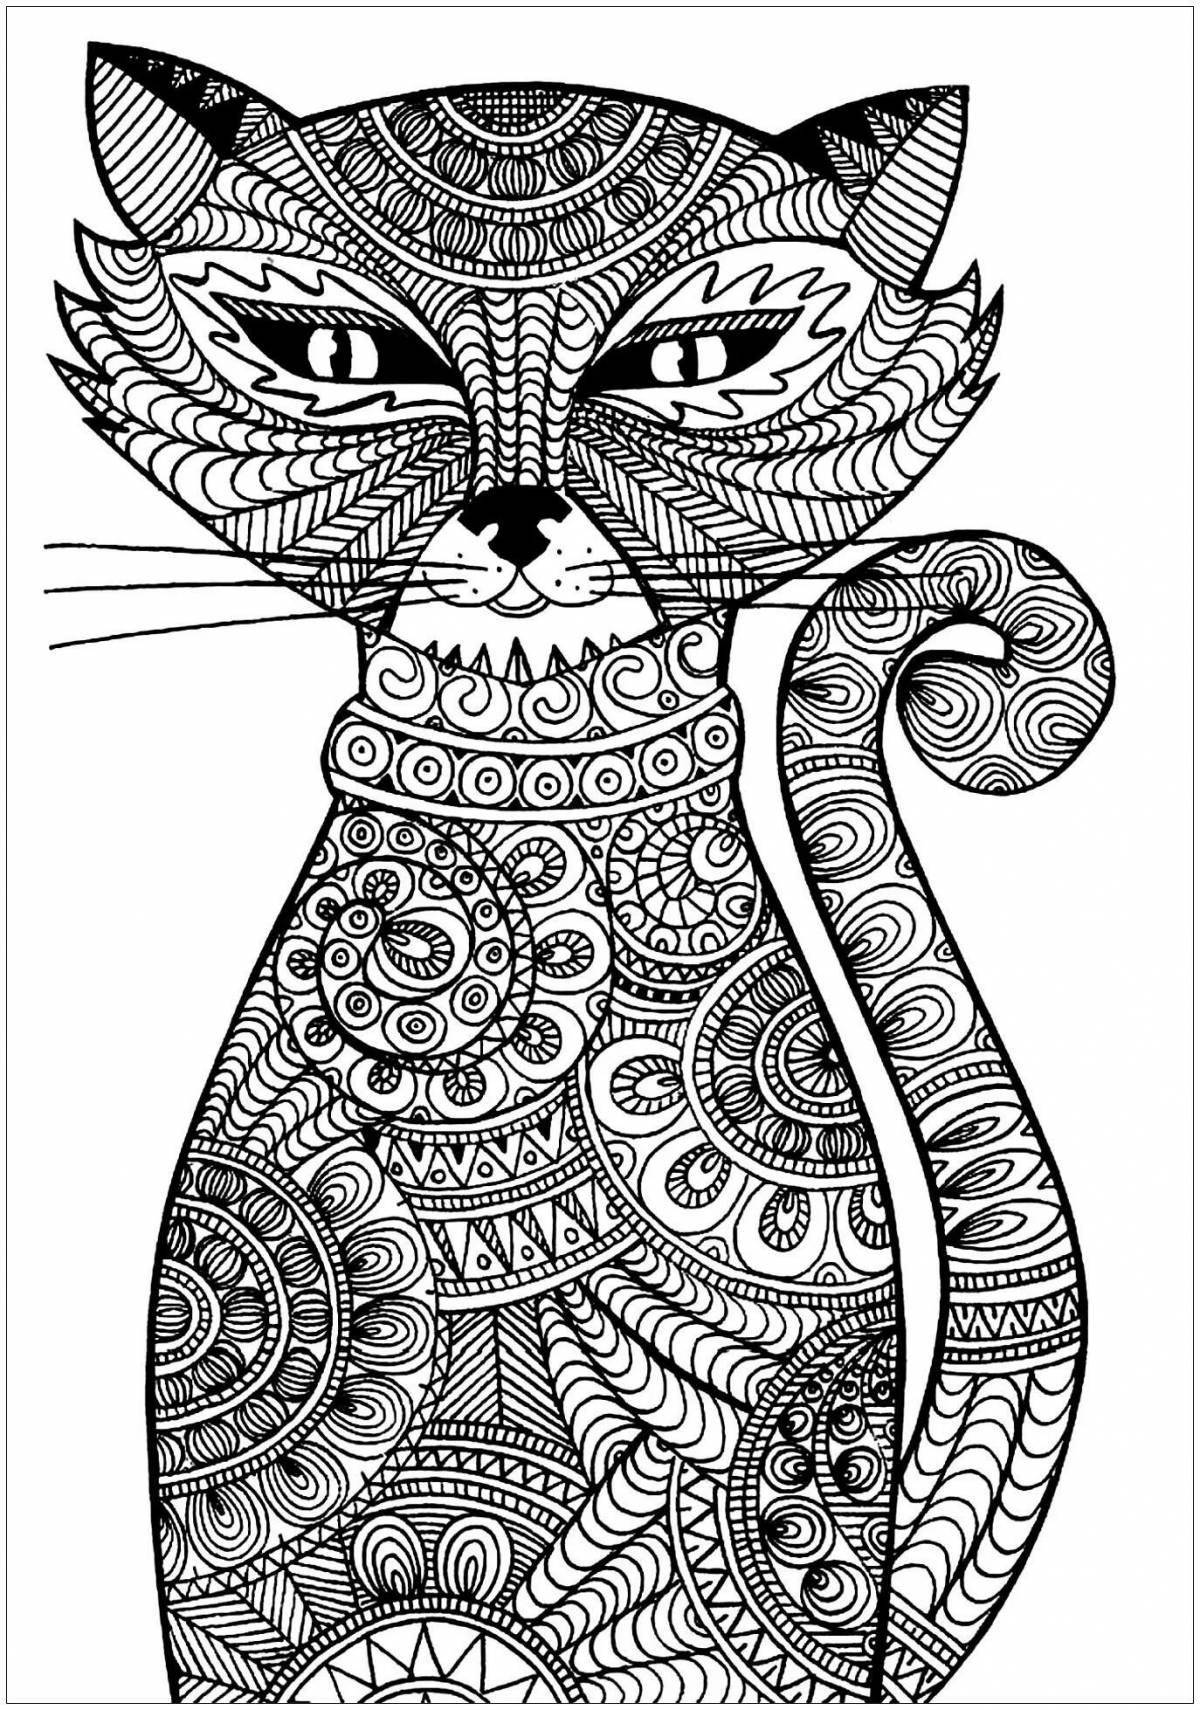 Charming coloring art therapy for adults